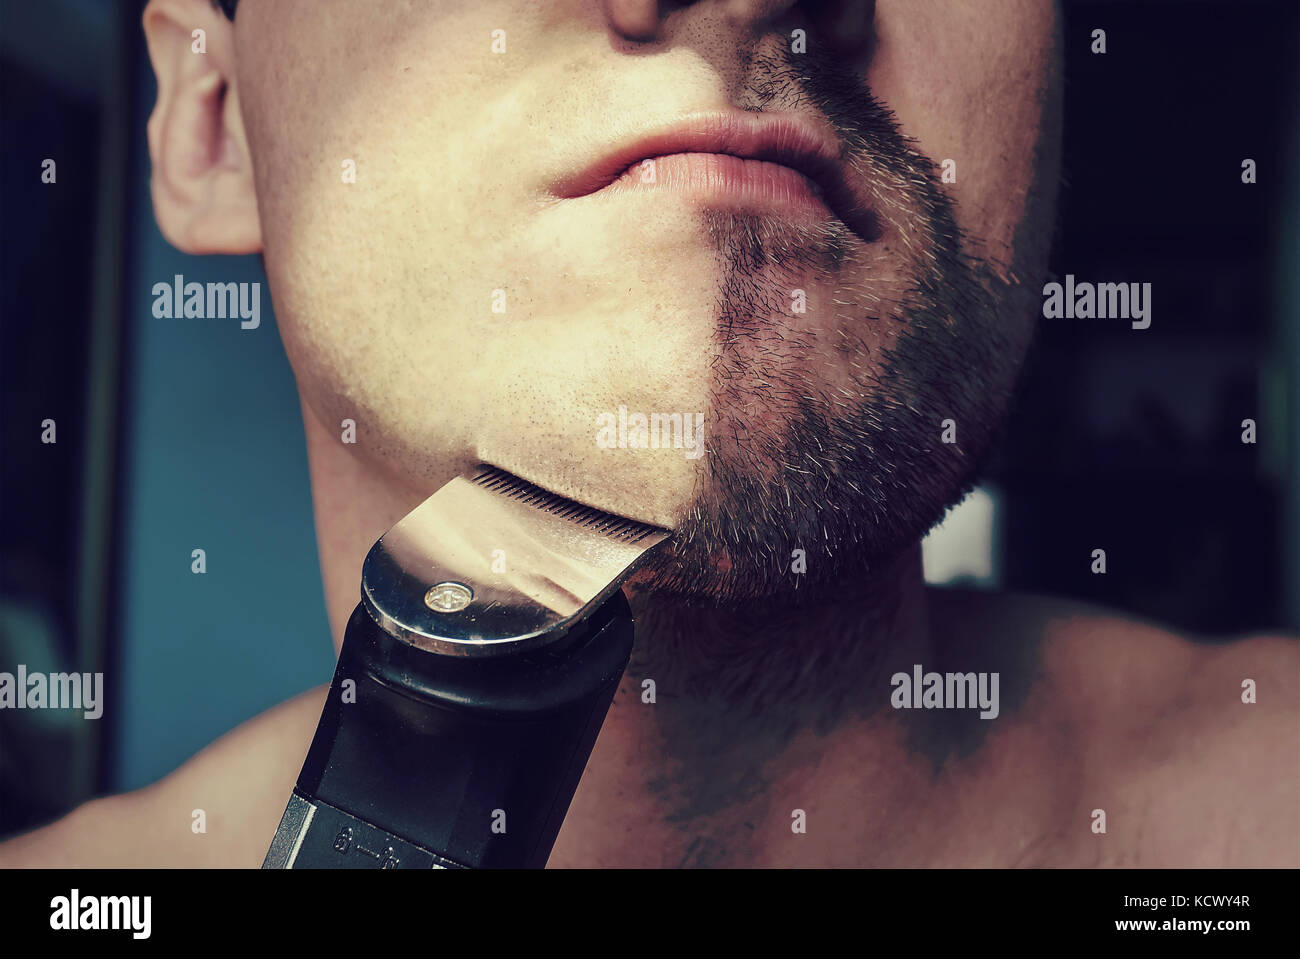 a man mowing a beard with hair clippers hair. Half face with a beard half shaved. Stock Photo